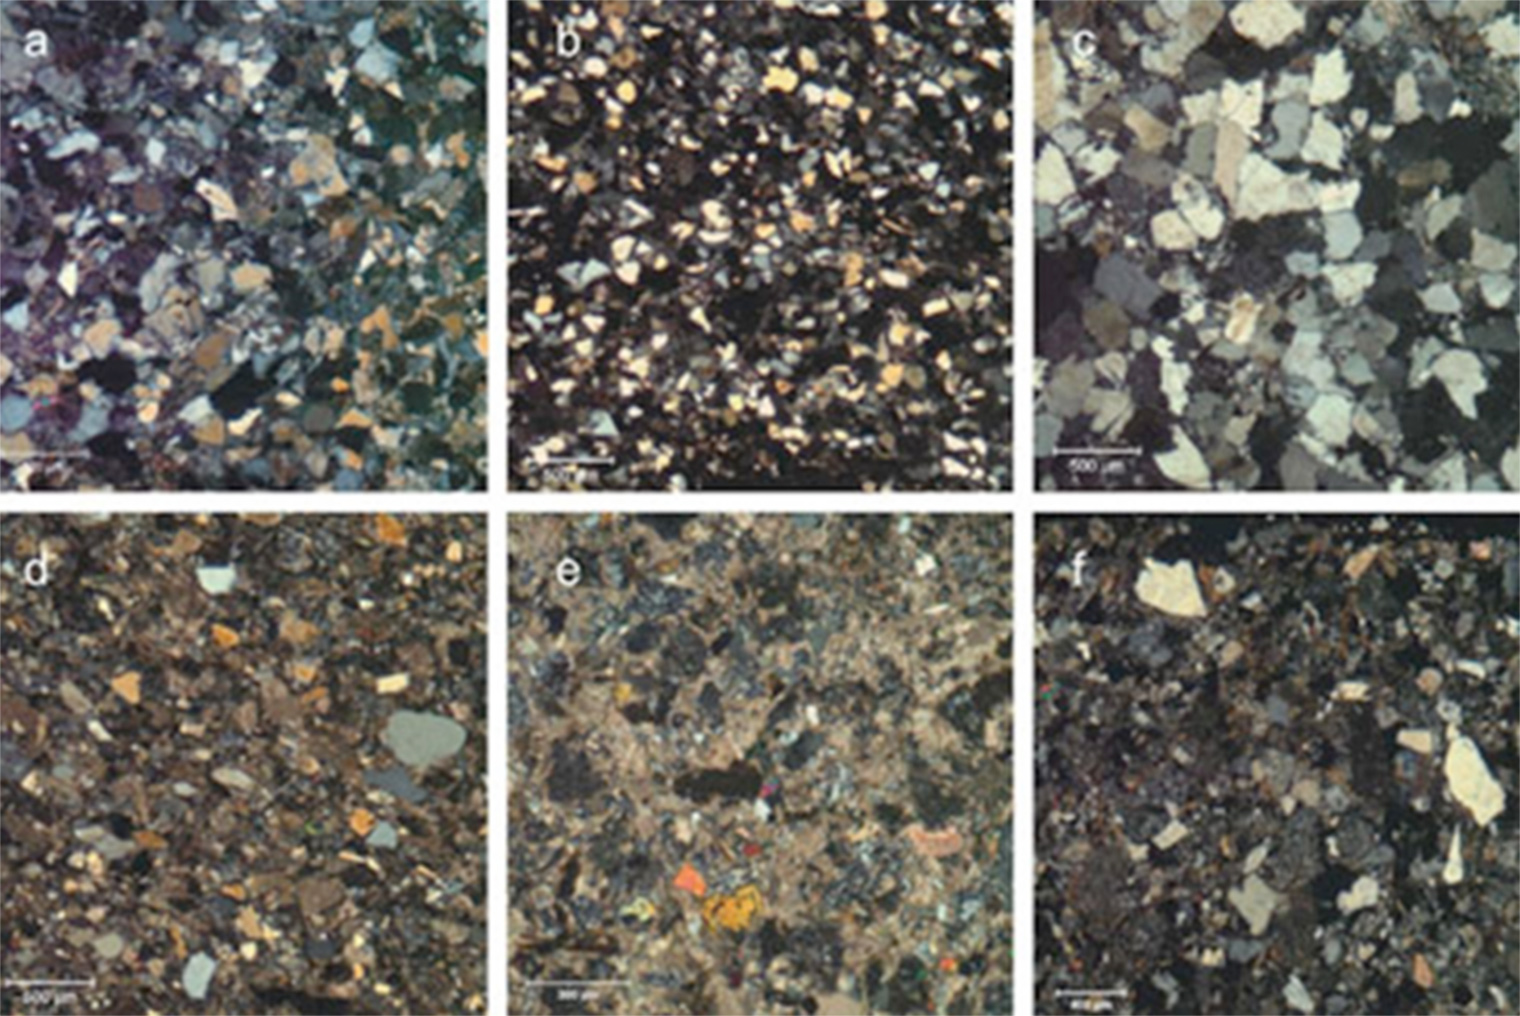 Micrographs (crossed polars) showing overall composition and texture of: a) feldspathic arenite; b) and c) fine and medium quartz arenite; d) and e) graywacke rich in rock fragments showing different amount of calcite cement; and f) graywacke rich in volcanic rock fragments.